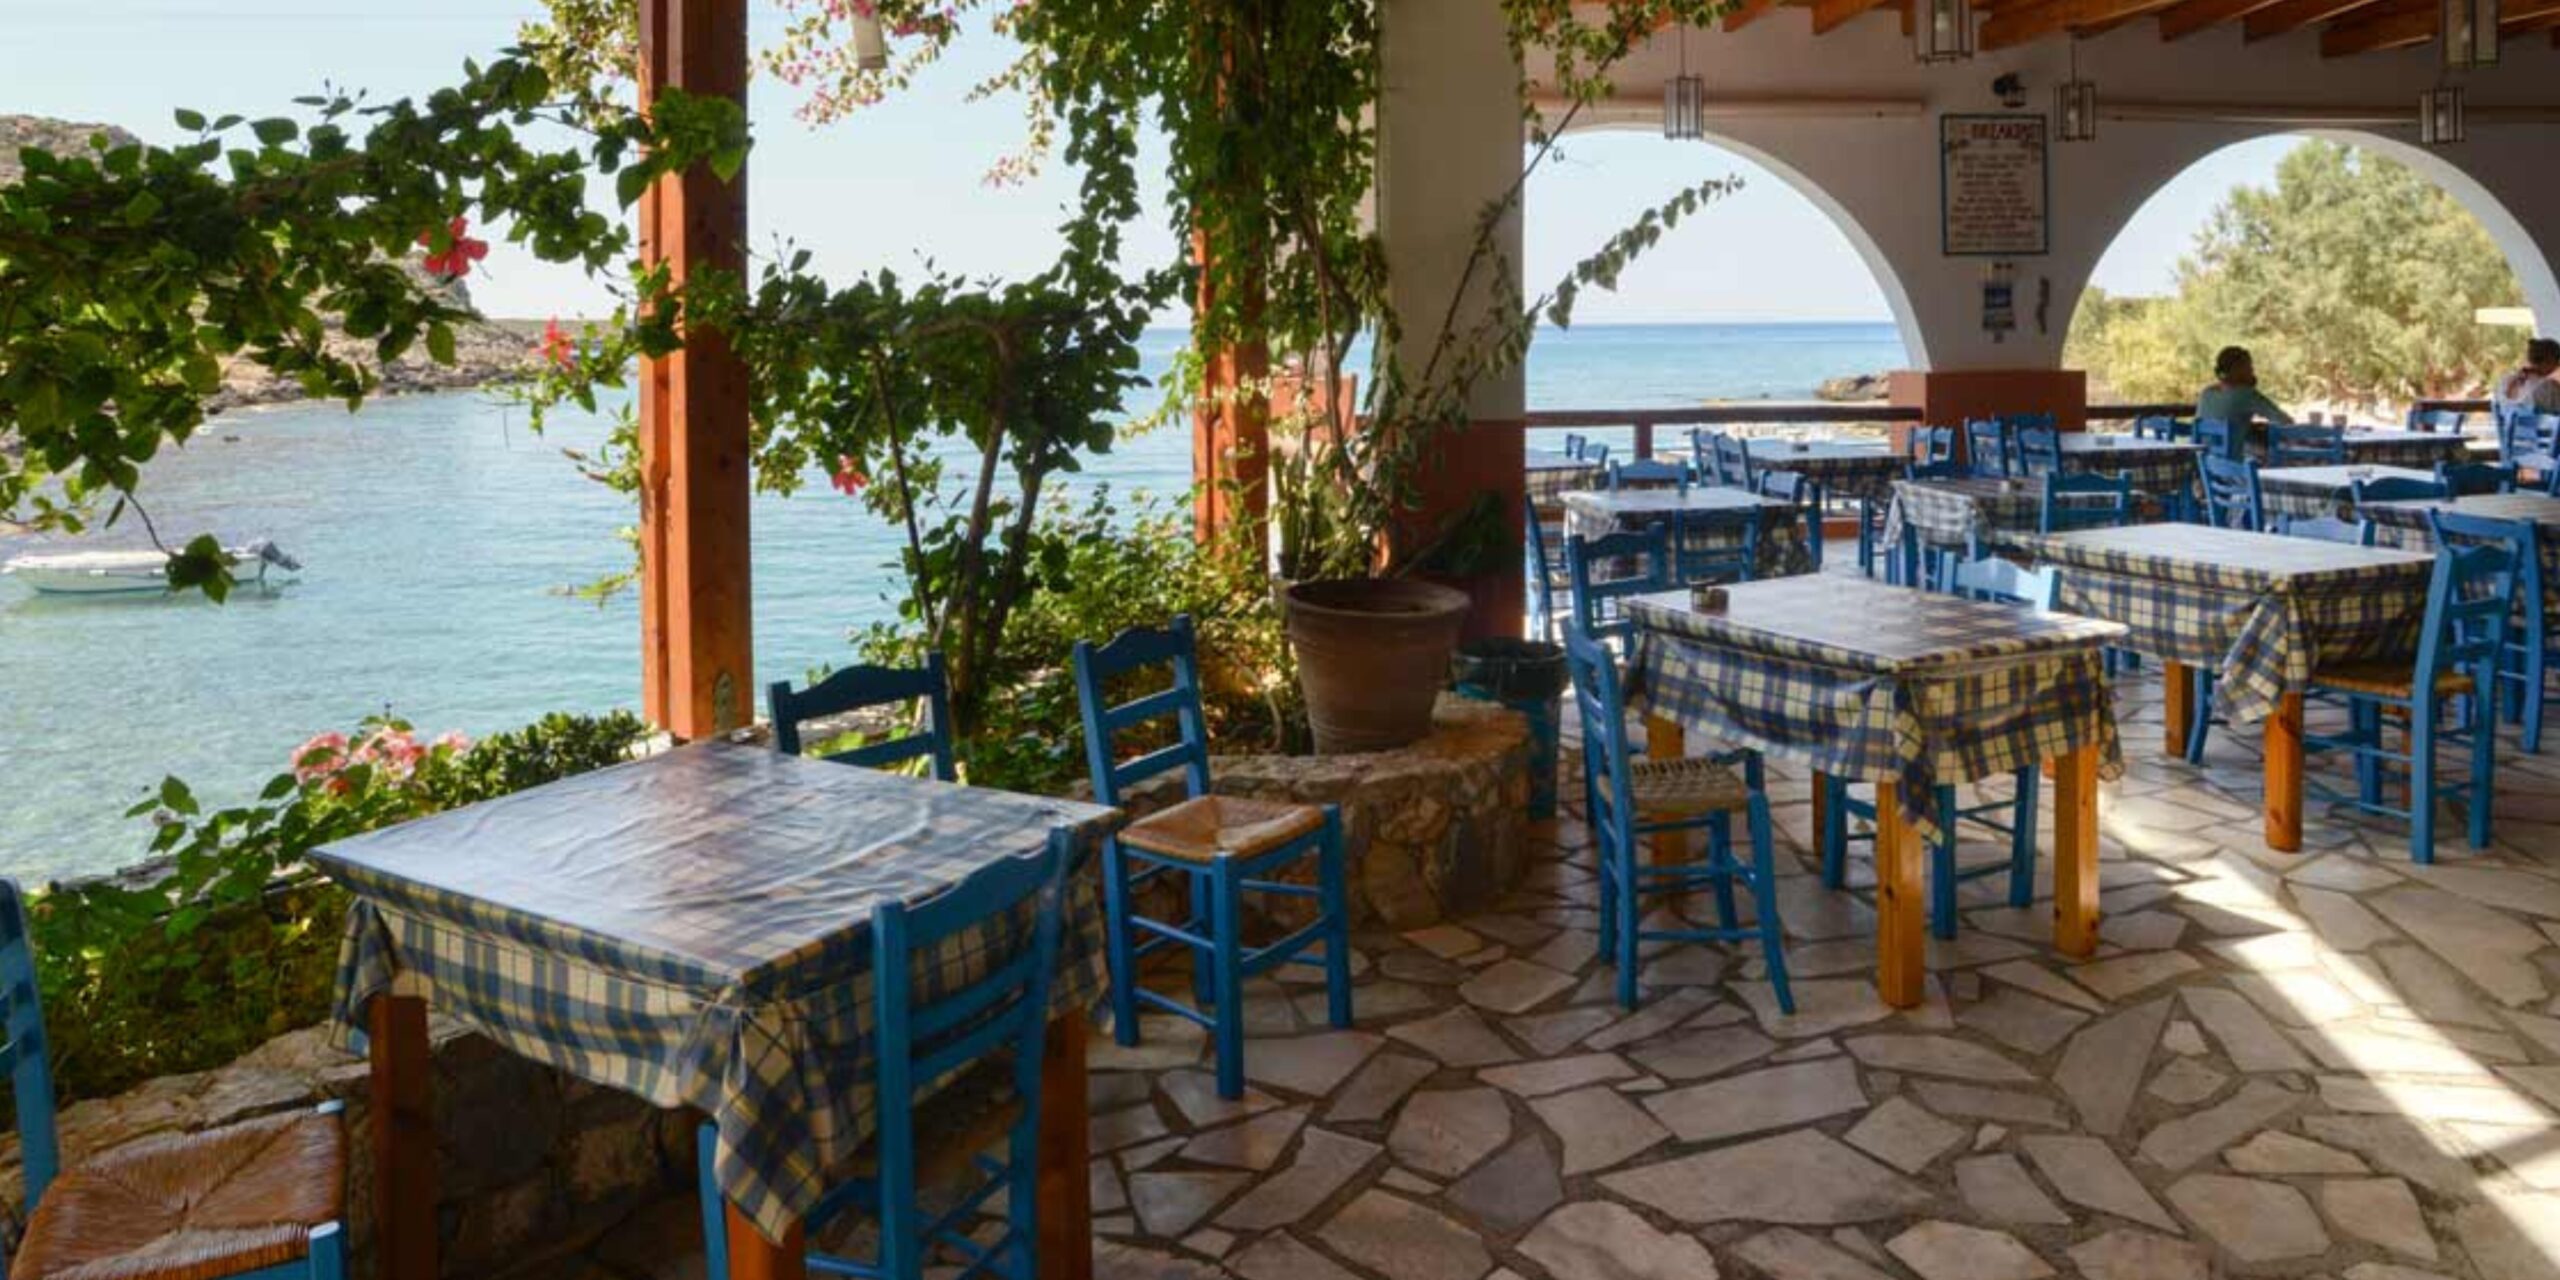 Seaside taverna with blue and white checked tablecloths and a view of the ocean.